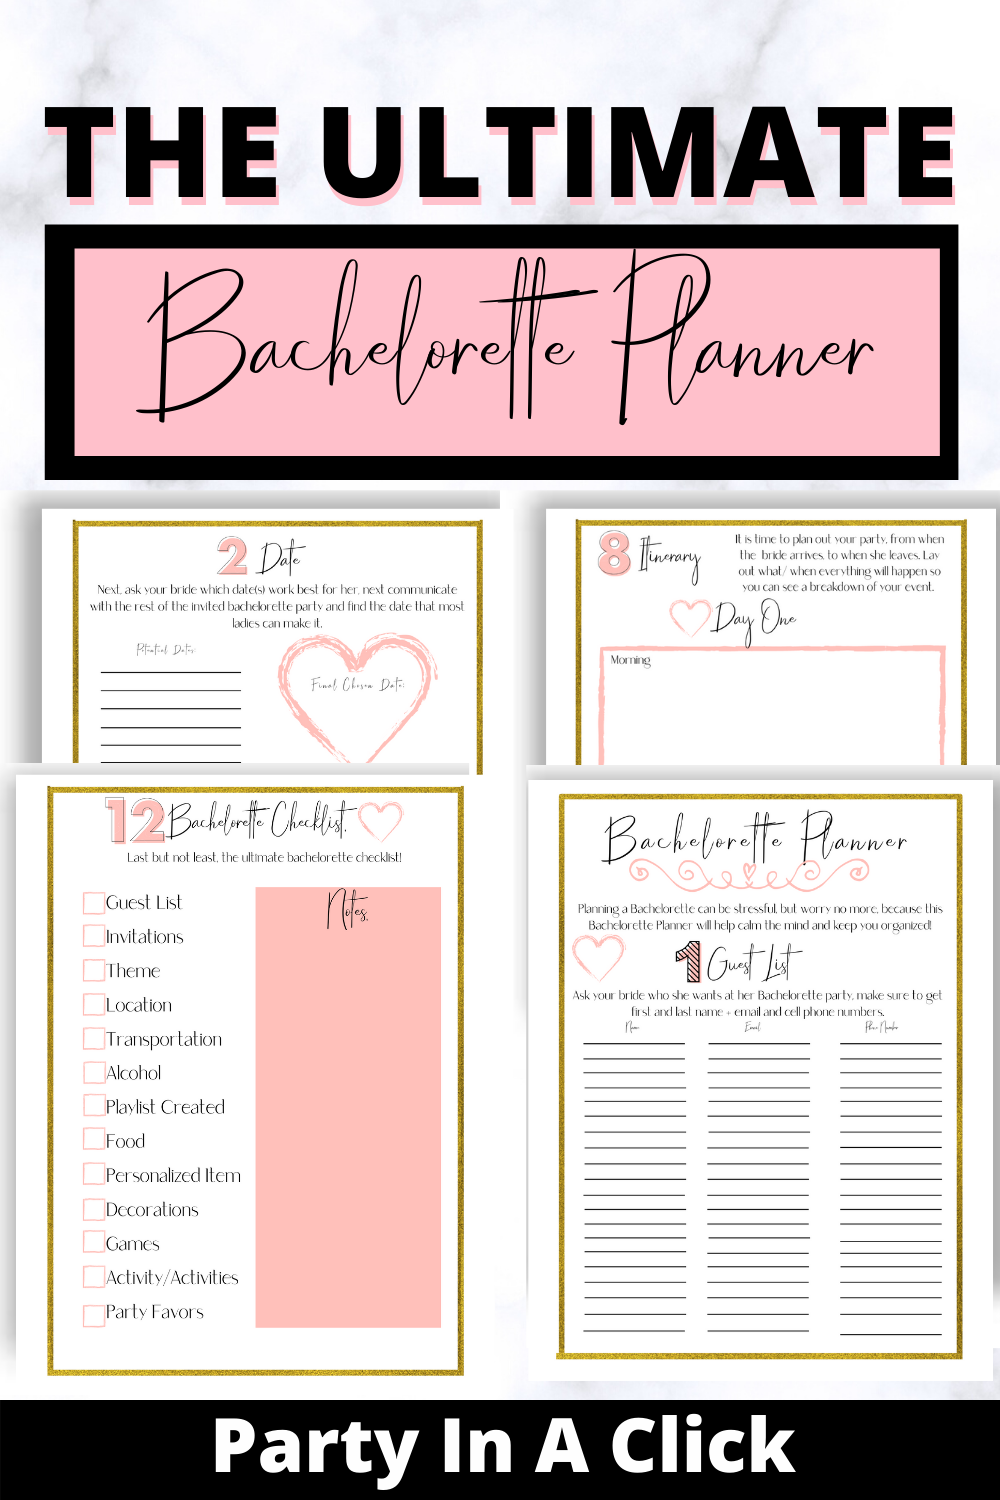 Bachelorette Party Planning Template